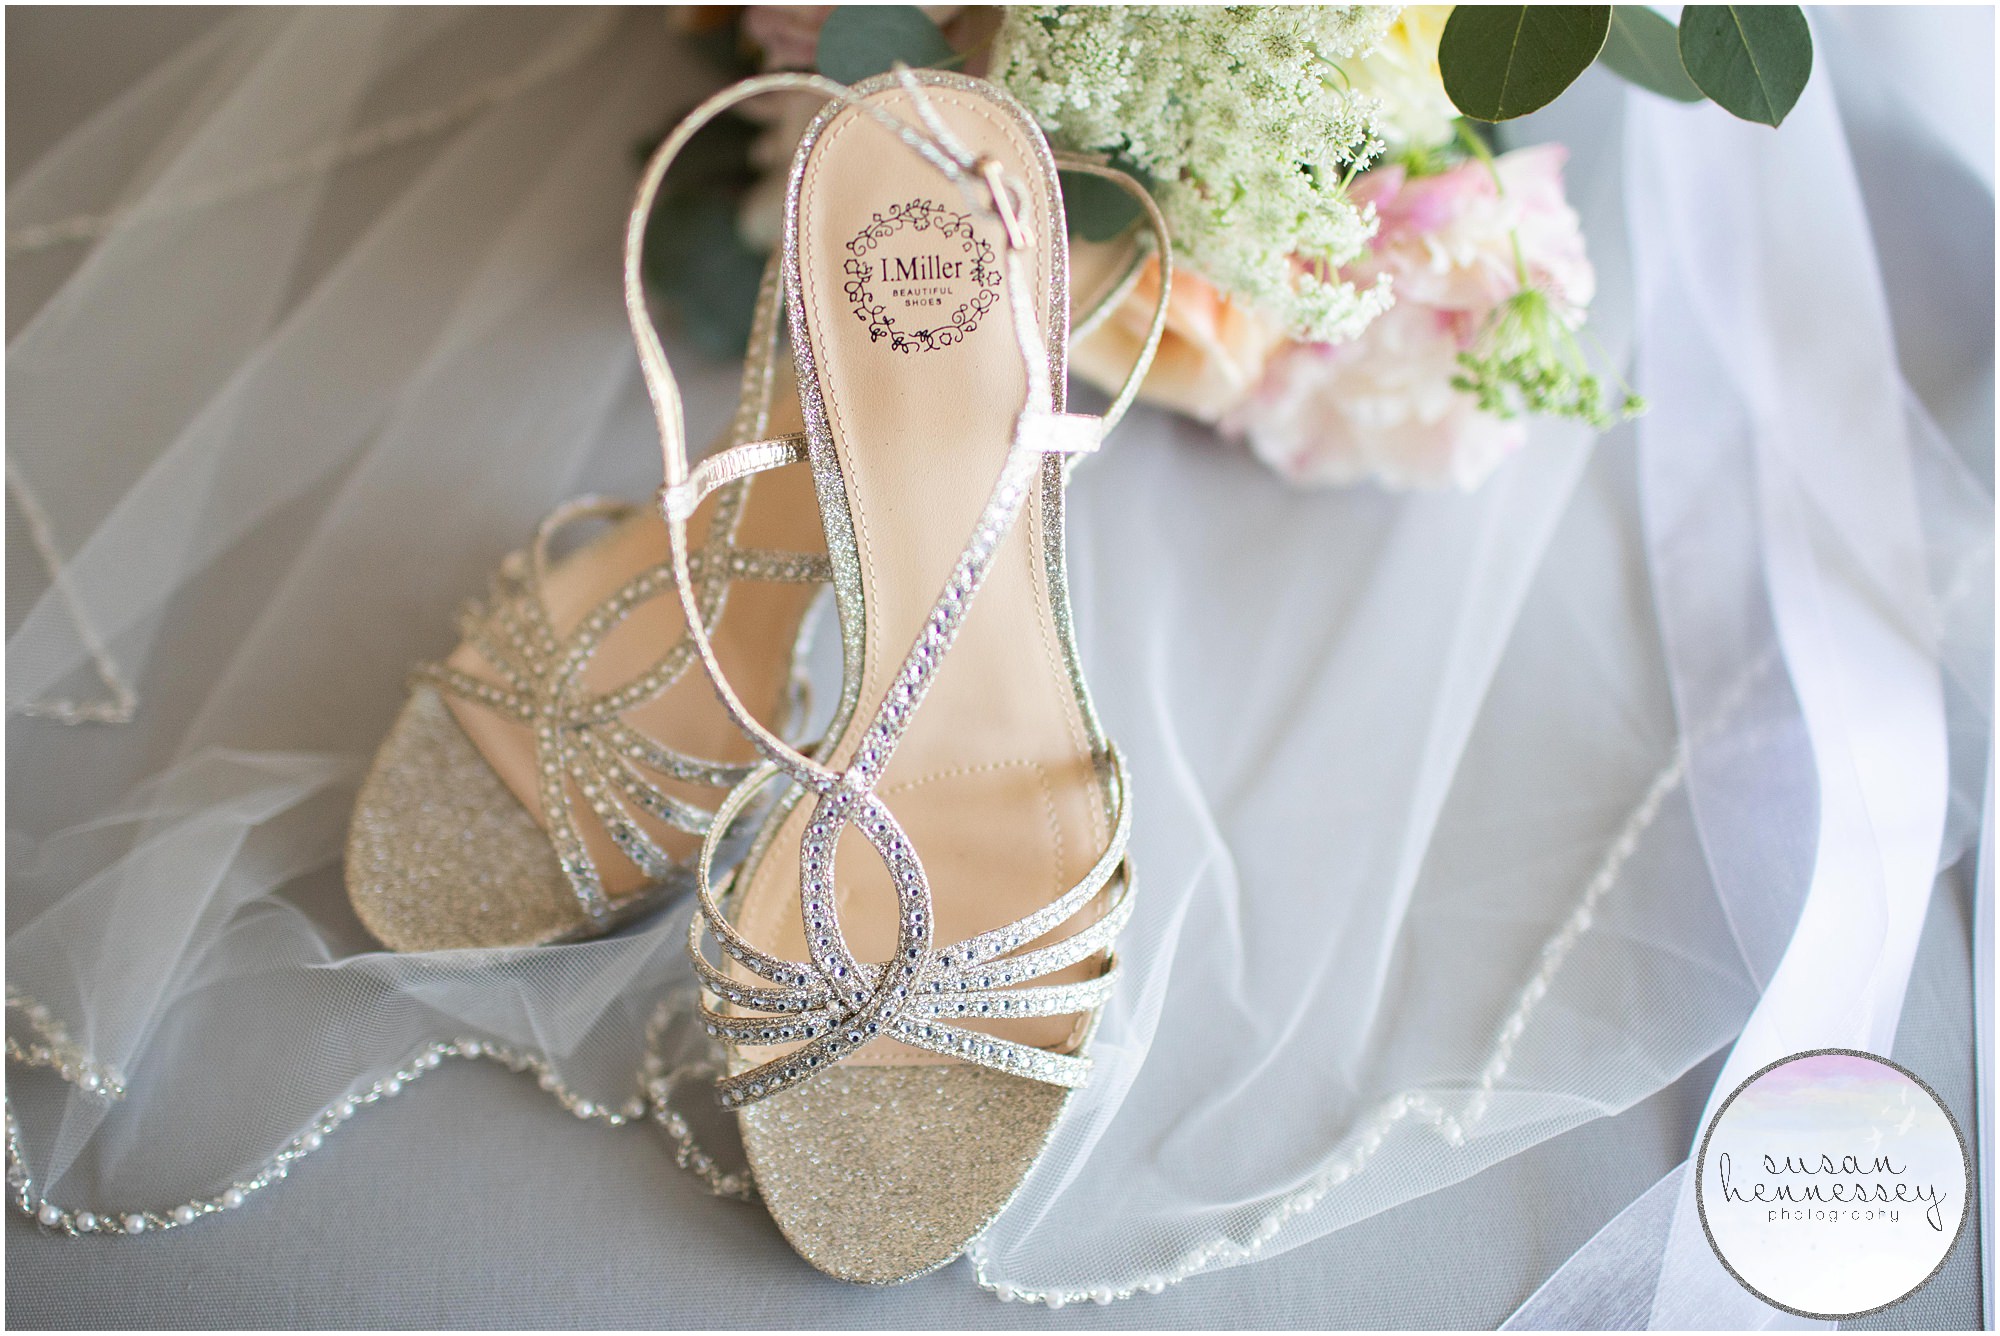 Detail of brides's wedding day shoes.